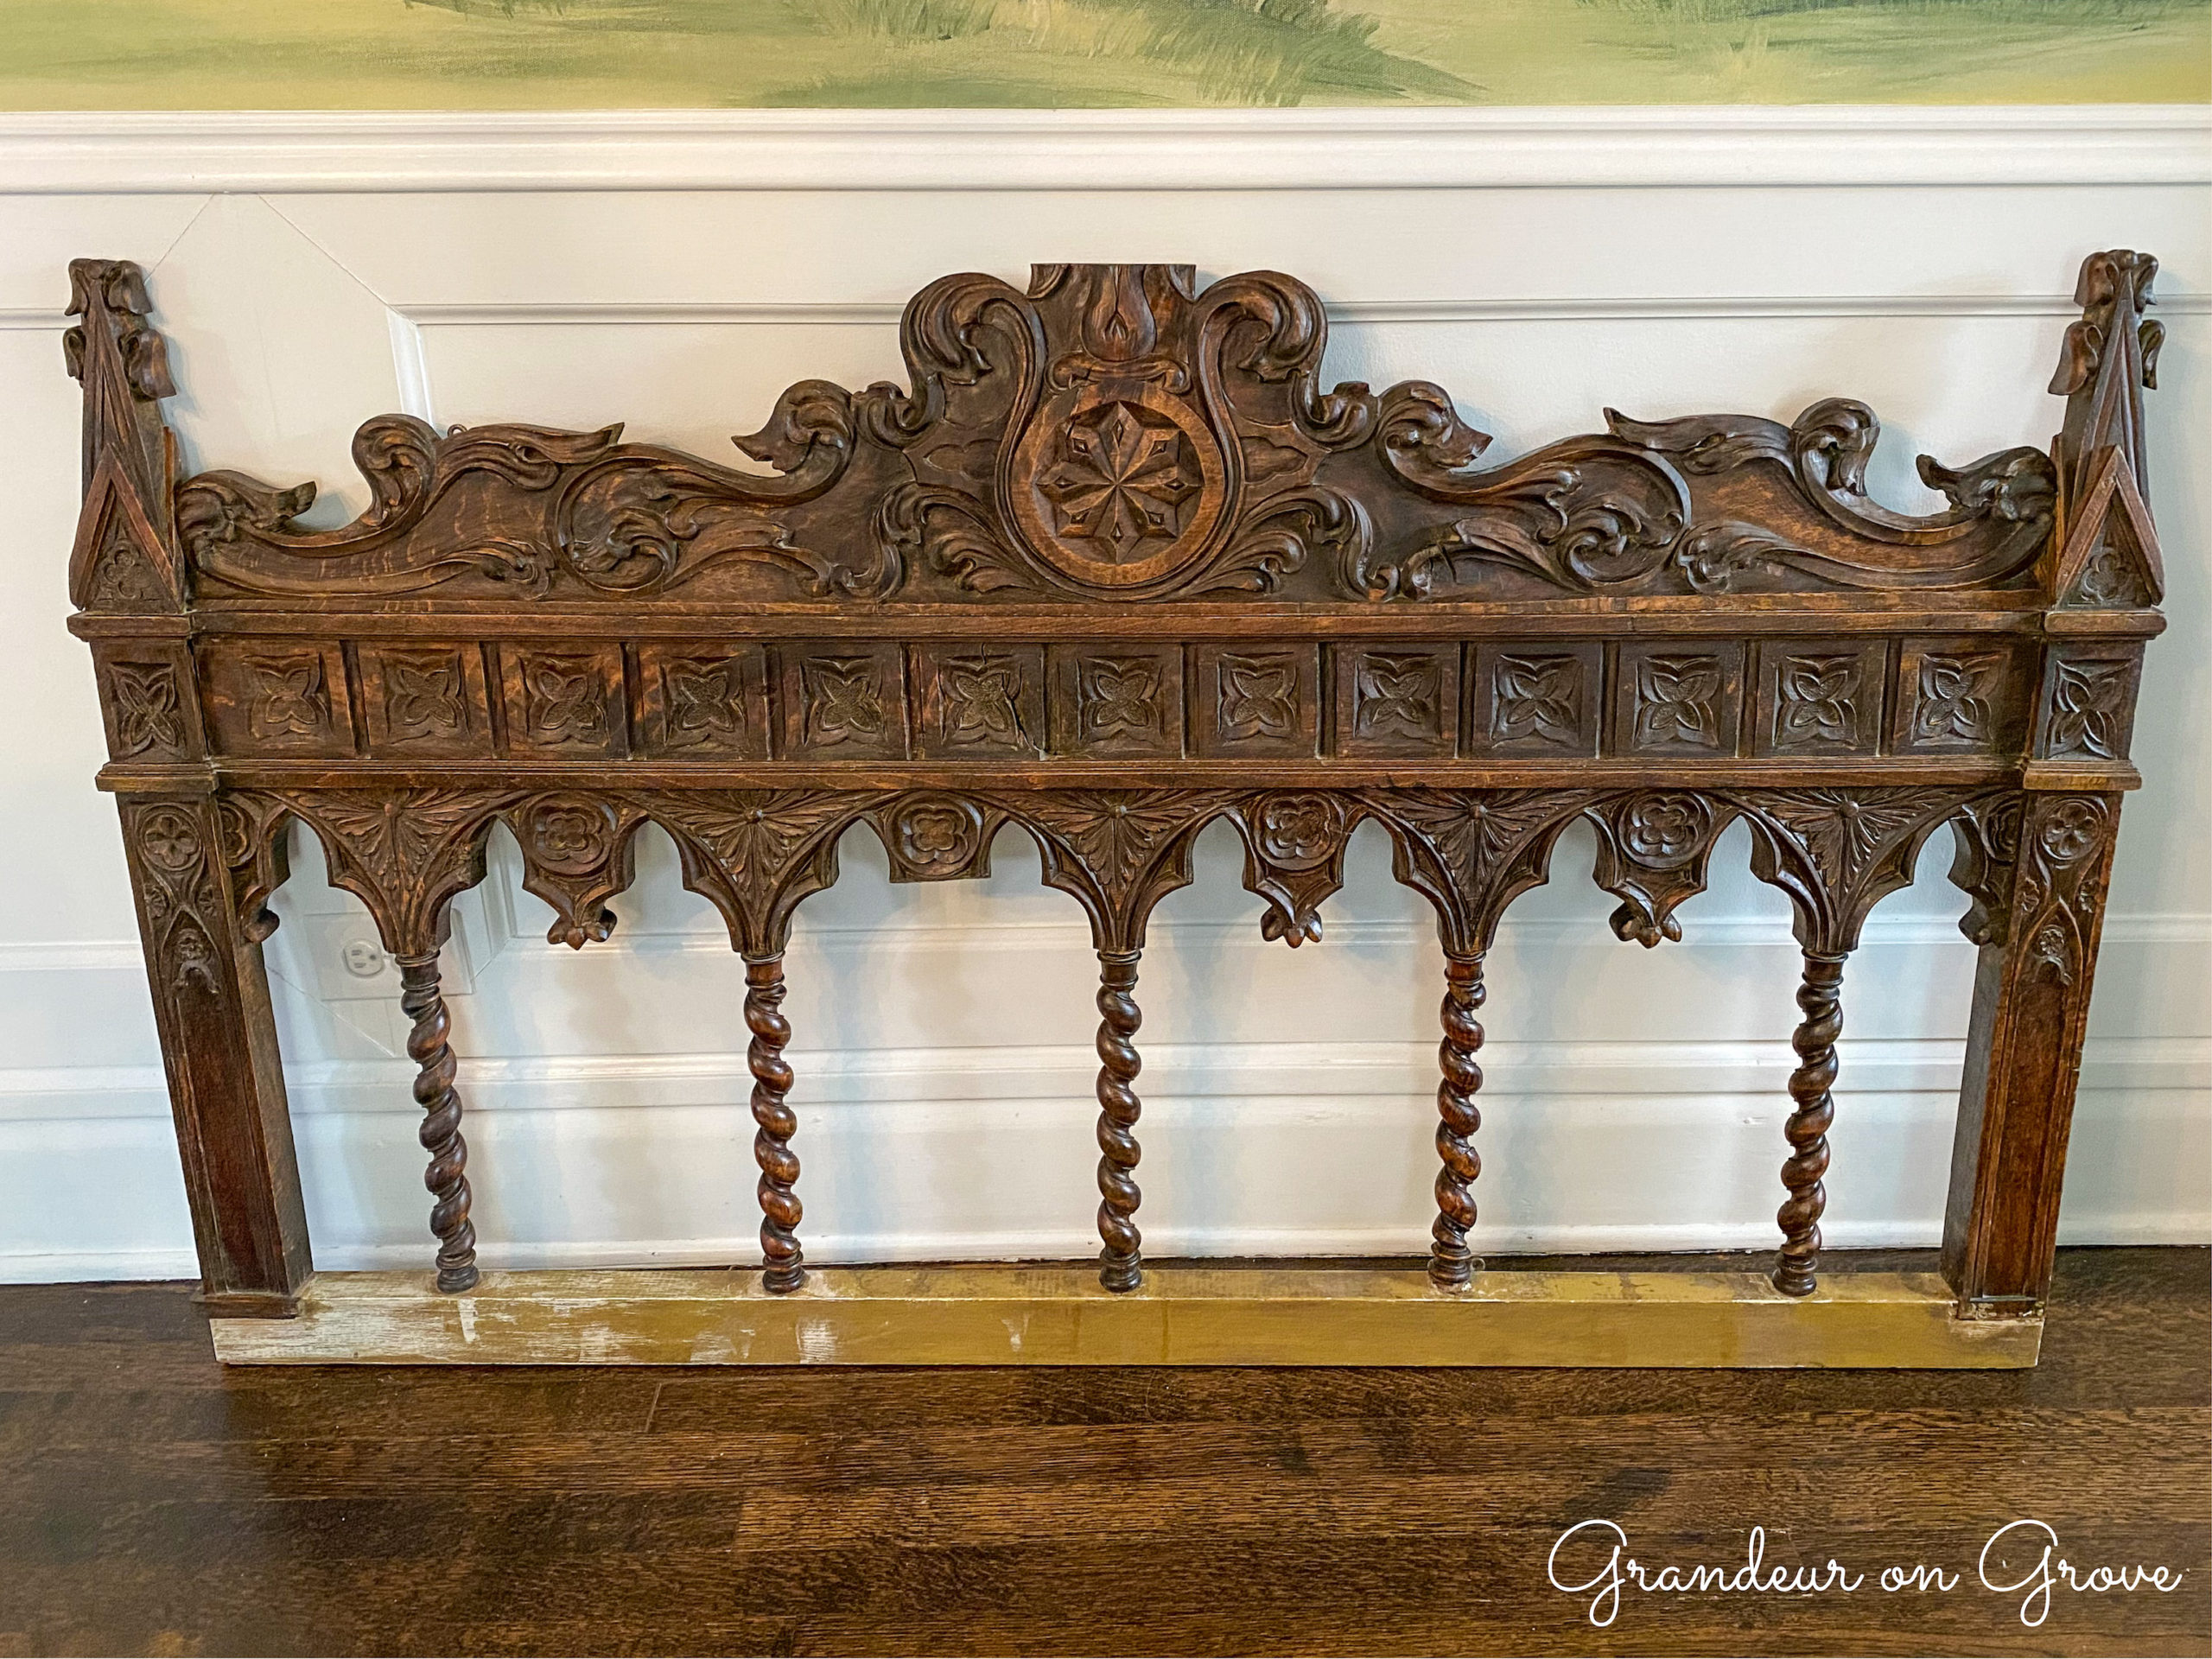 The carved wooden piece after I dusted and polished it. It was previously used as a bed headboard.